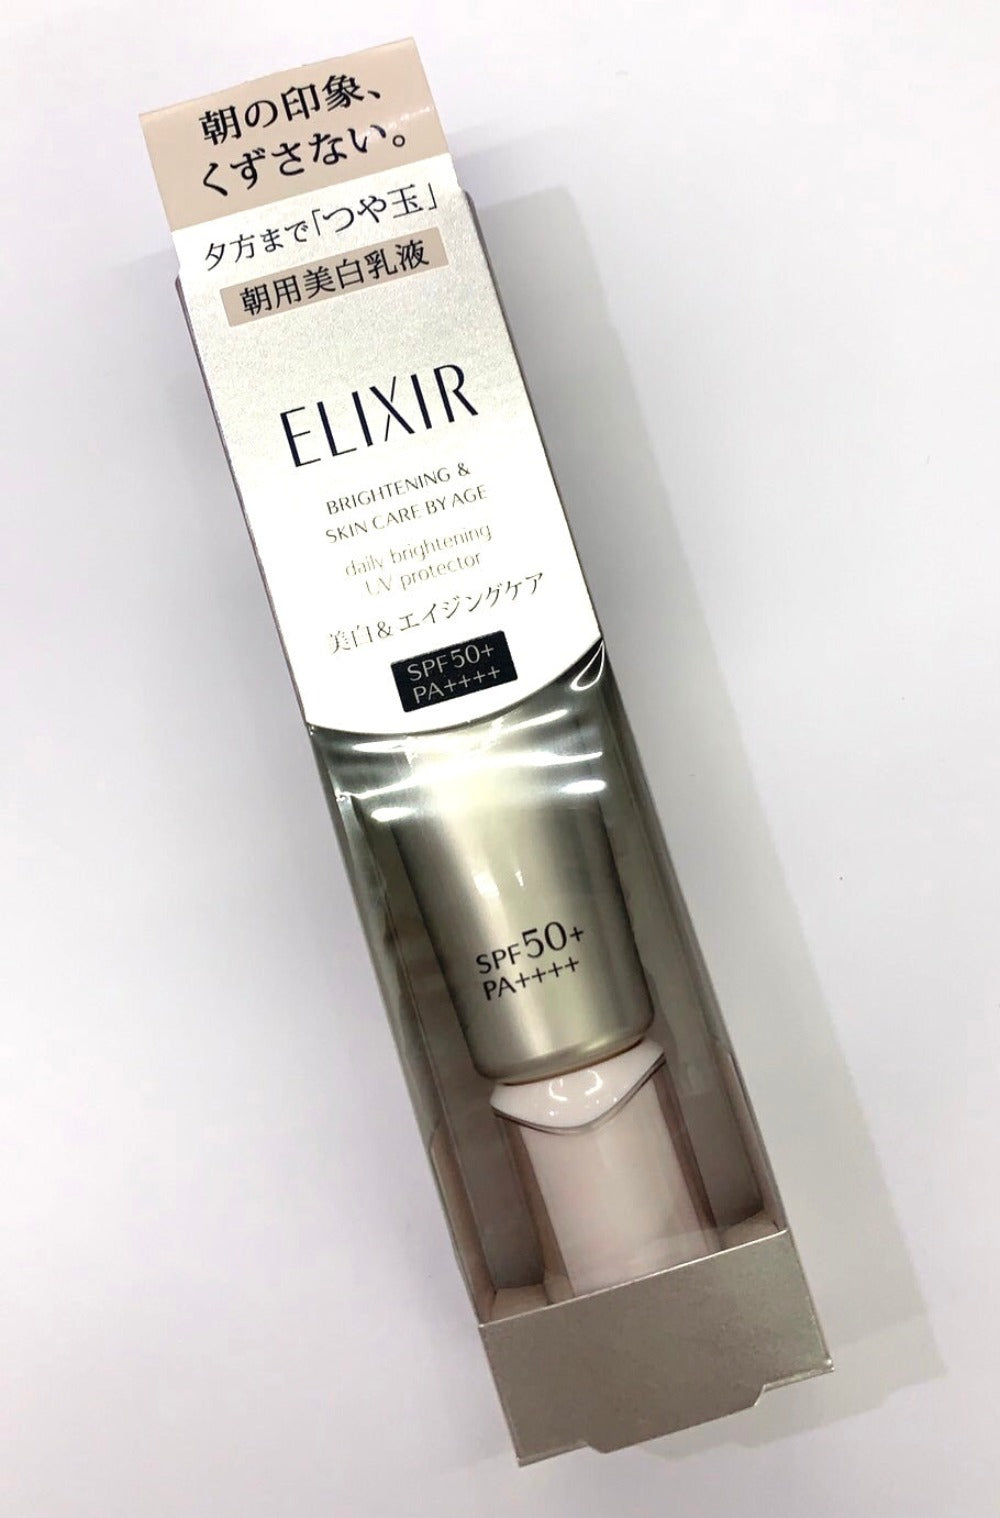 US SHIP! Shiseido Elixir Brightening & Skin Care By Age Daily Brightening UV Protector SPF50 PA++++ 35ml